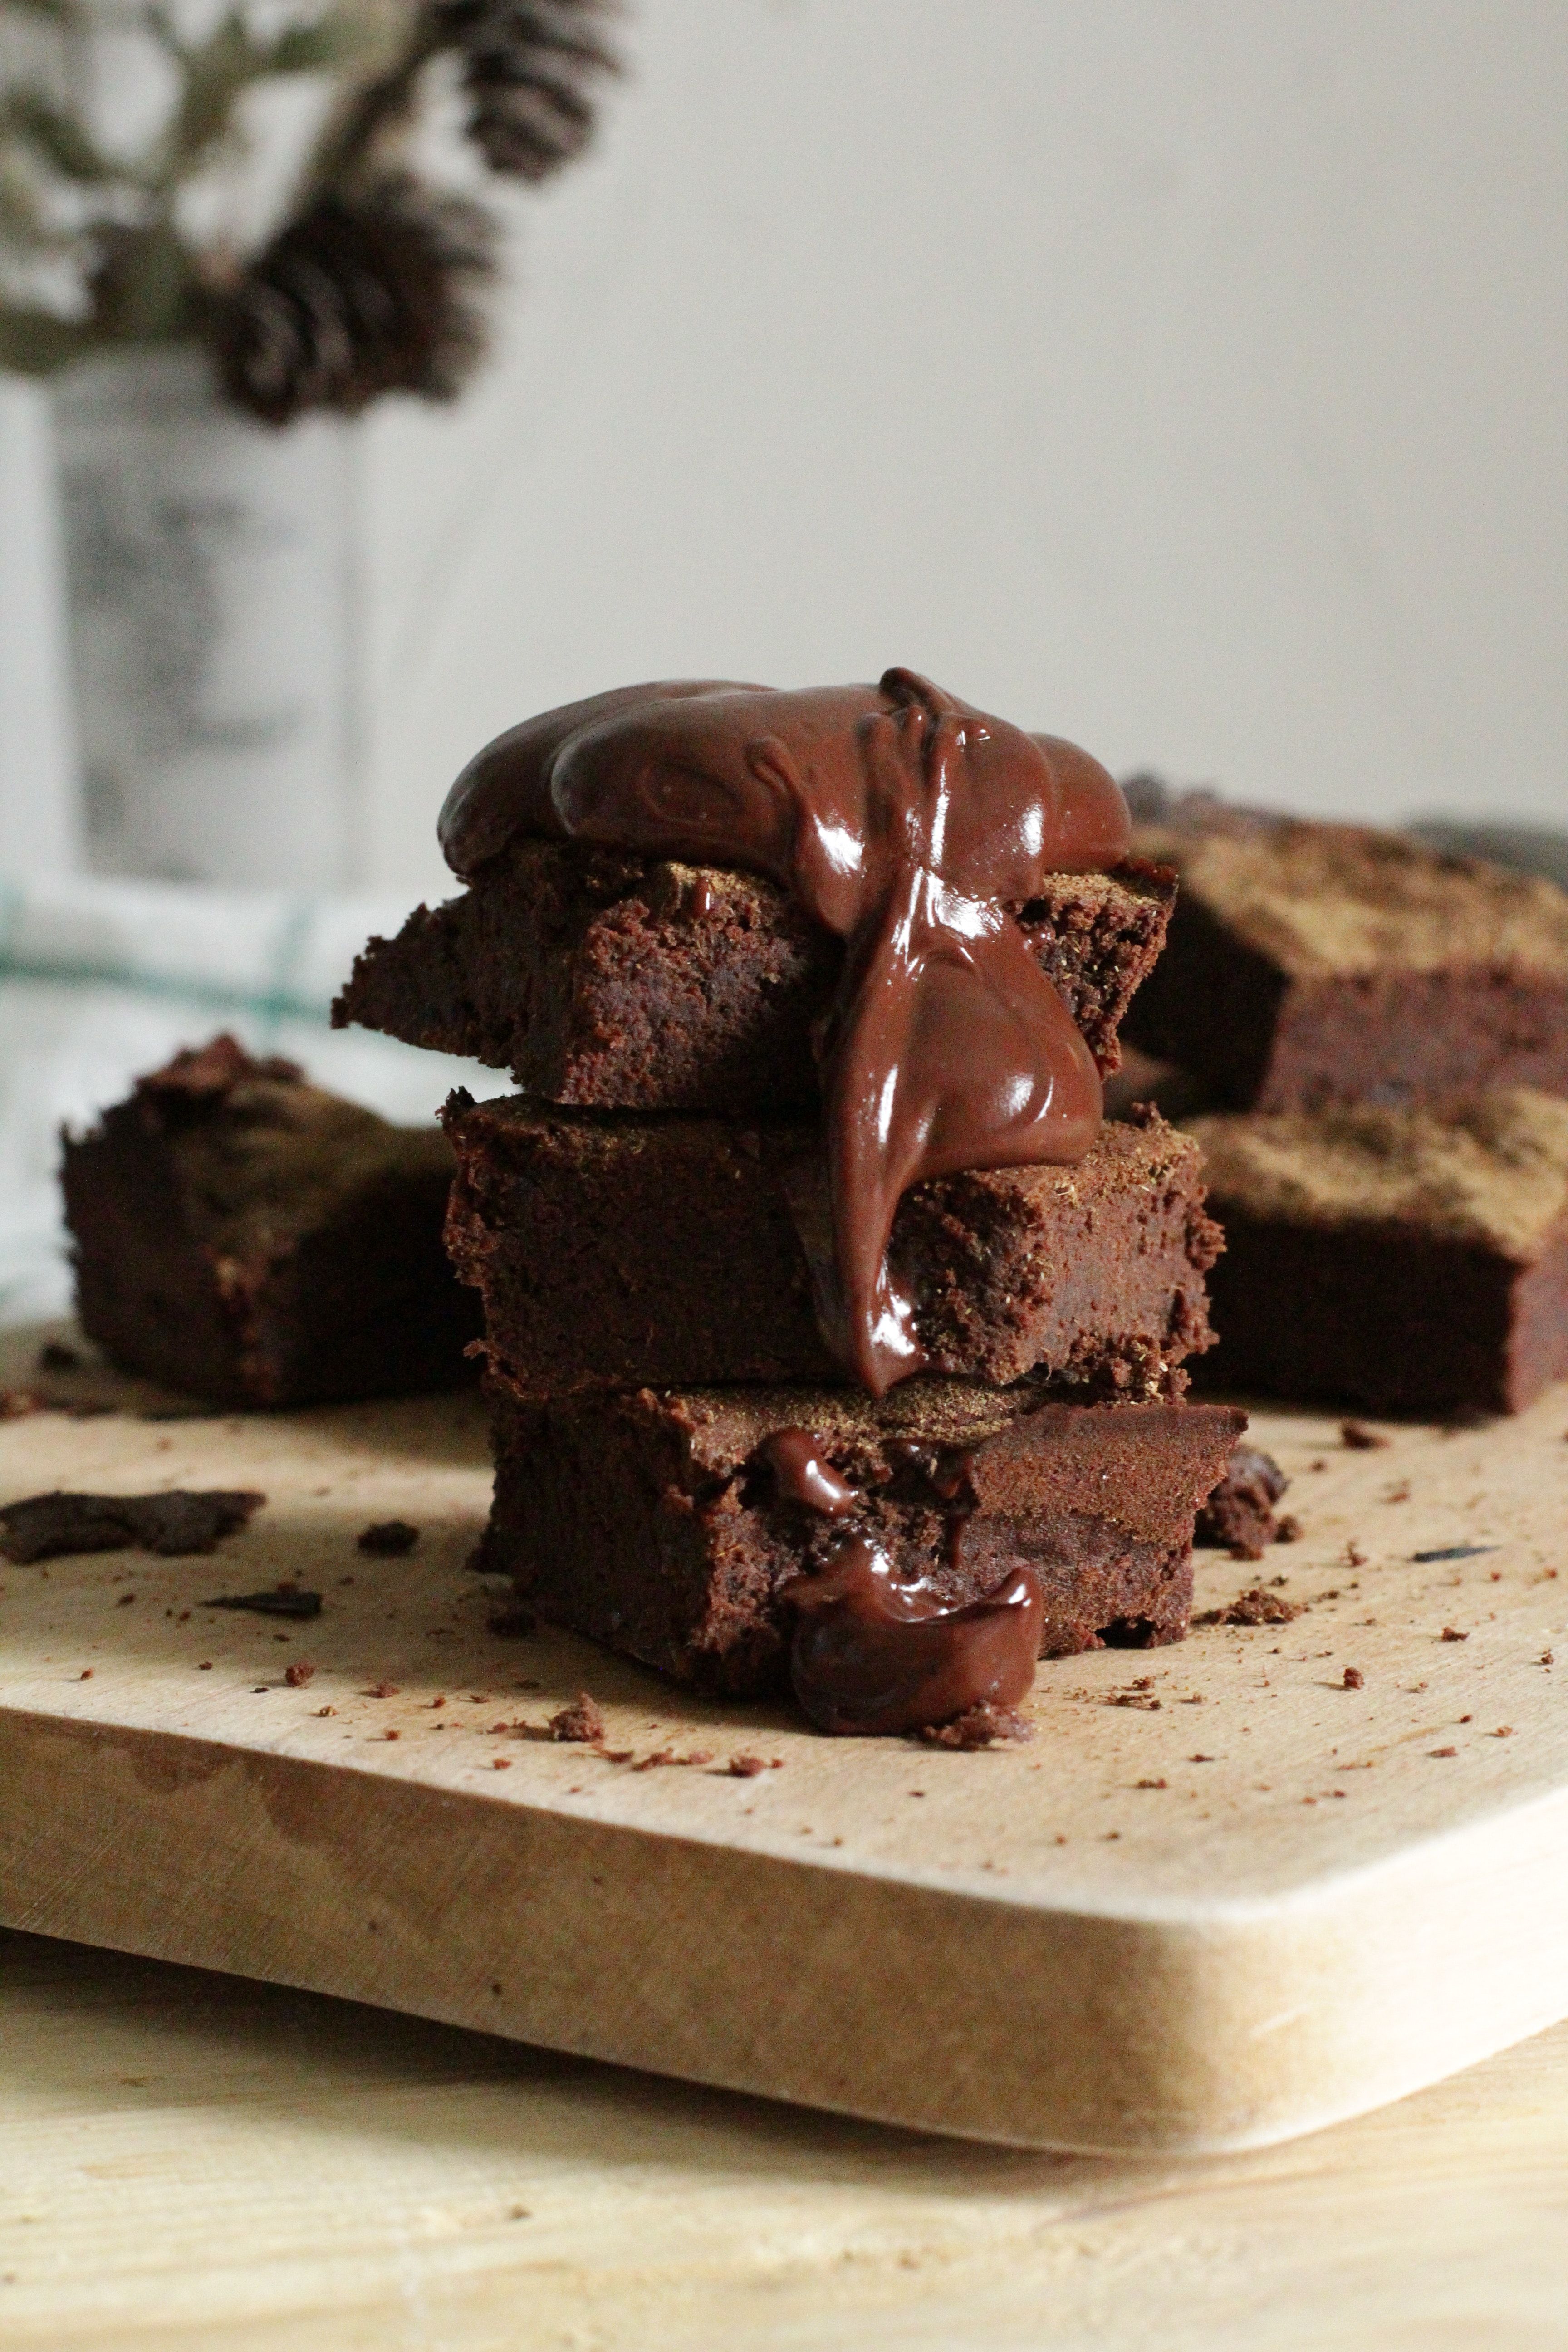 Four brownies stacked on top of each other with chocolate dripping down the sides. - Chocolate, bakery, cake